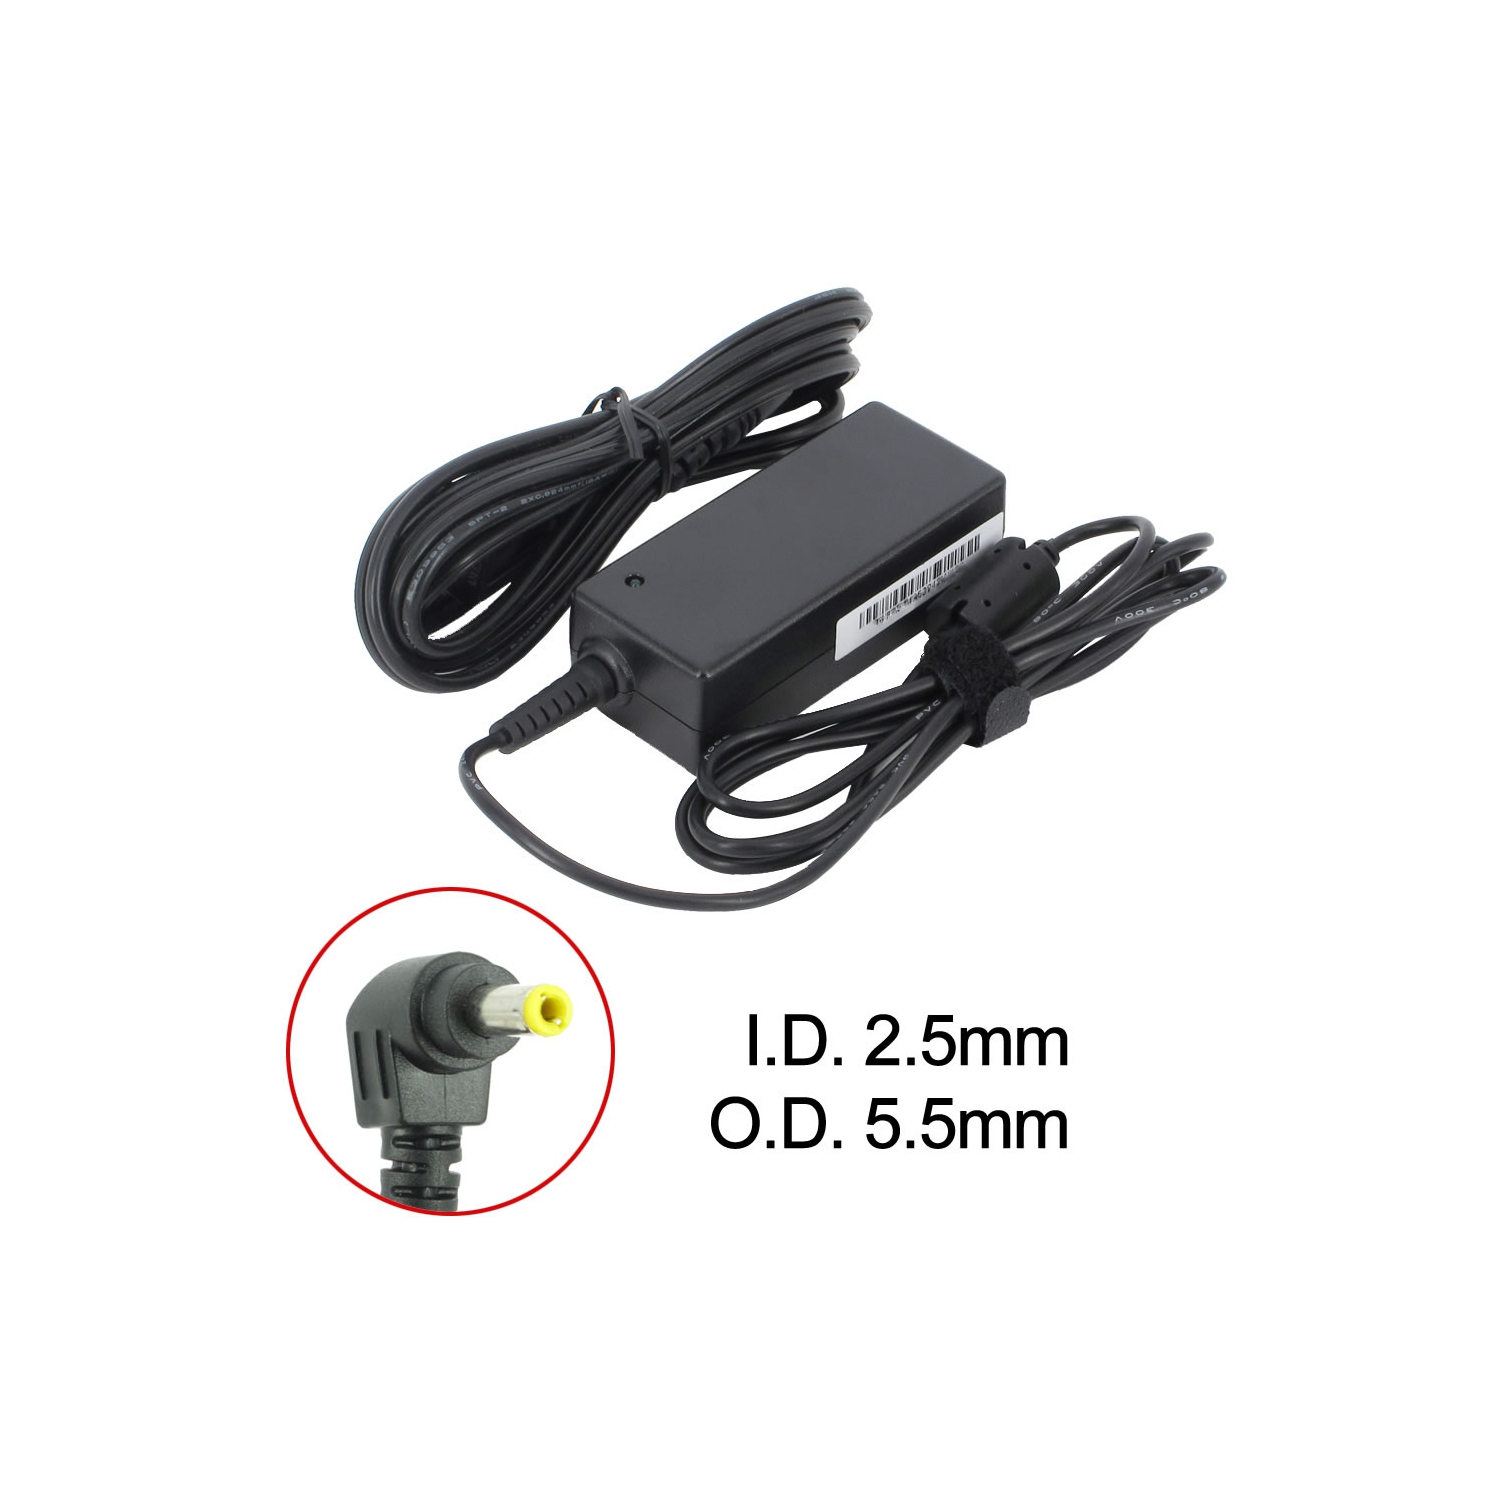 BattDepot: New Laptop AC Adapter for Lenovo 41R4452, ADP-40NH B, 31038046, 41R4447, 45K2201, 55Y9367, 57Y6367